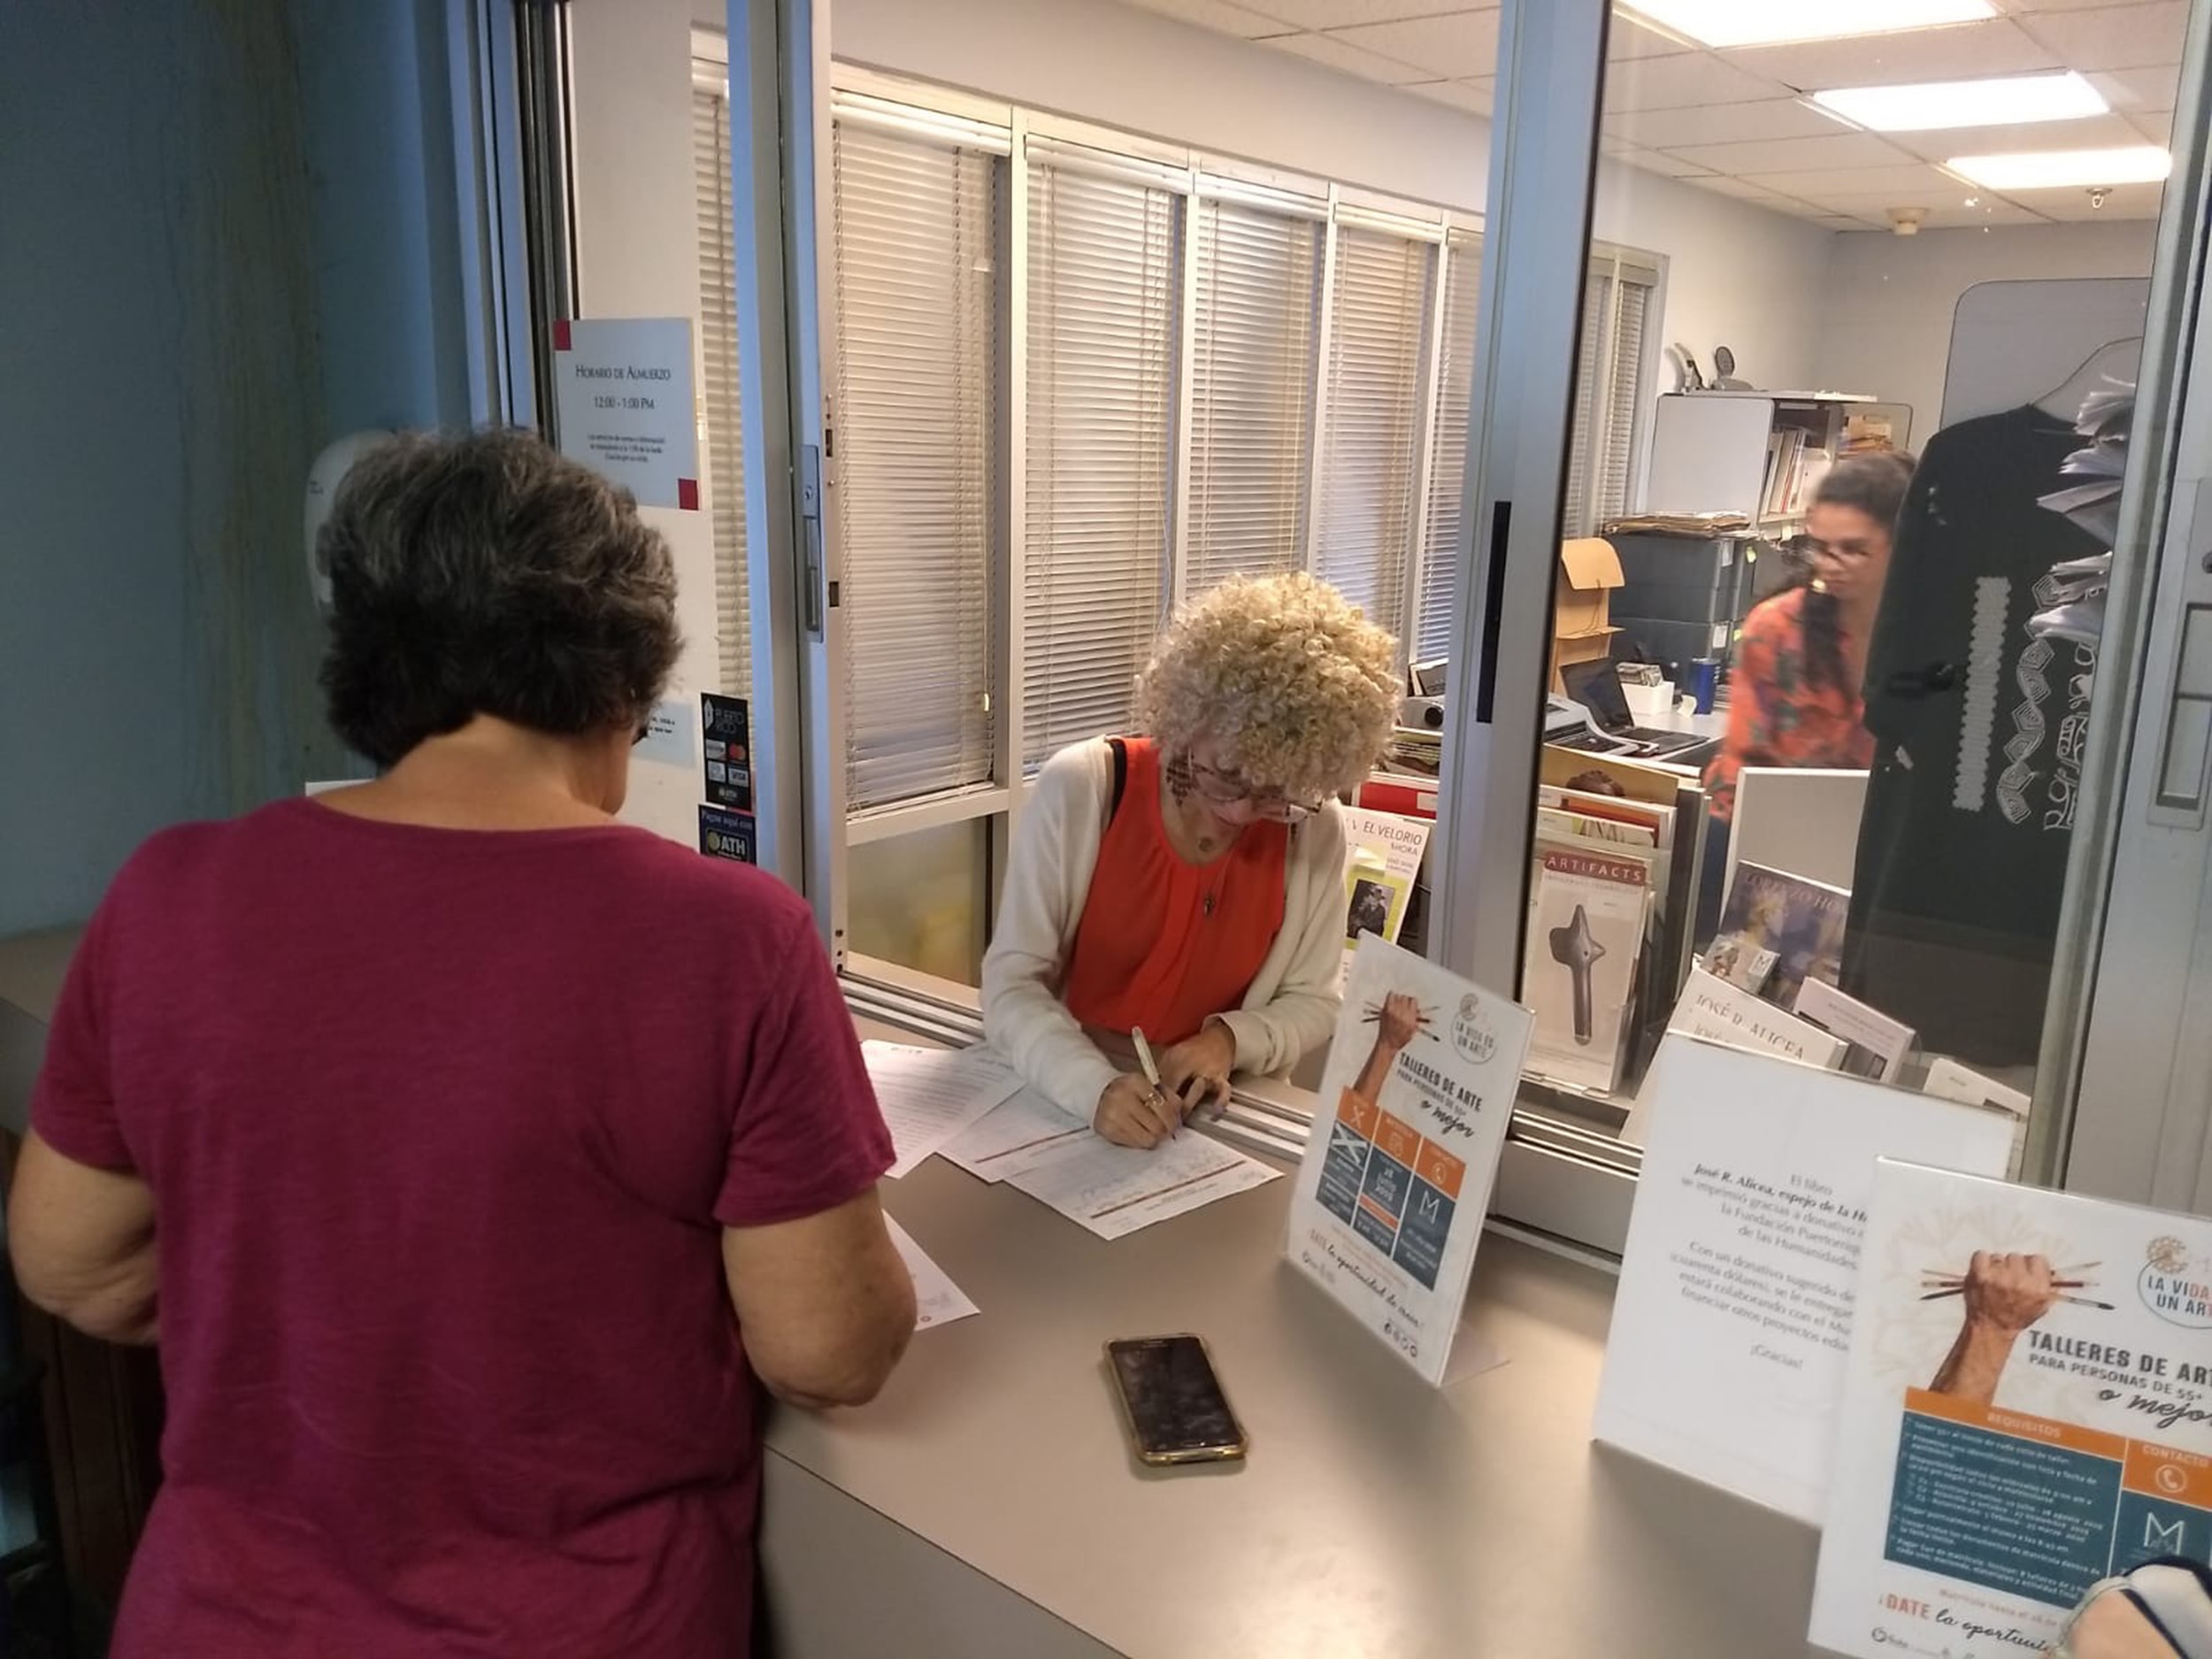 A visitor comes to a front desk to enroll in the program.